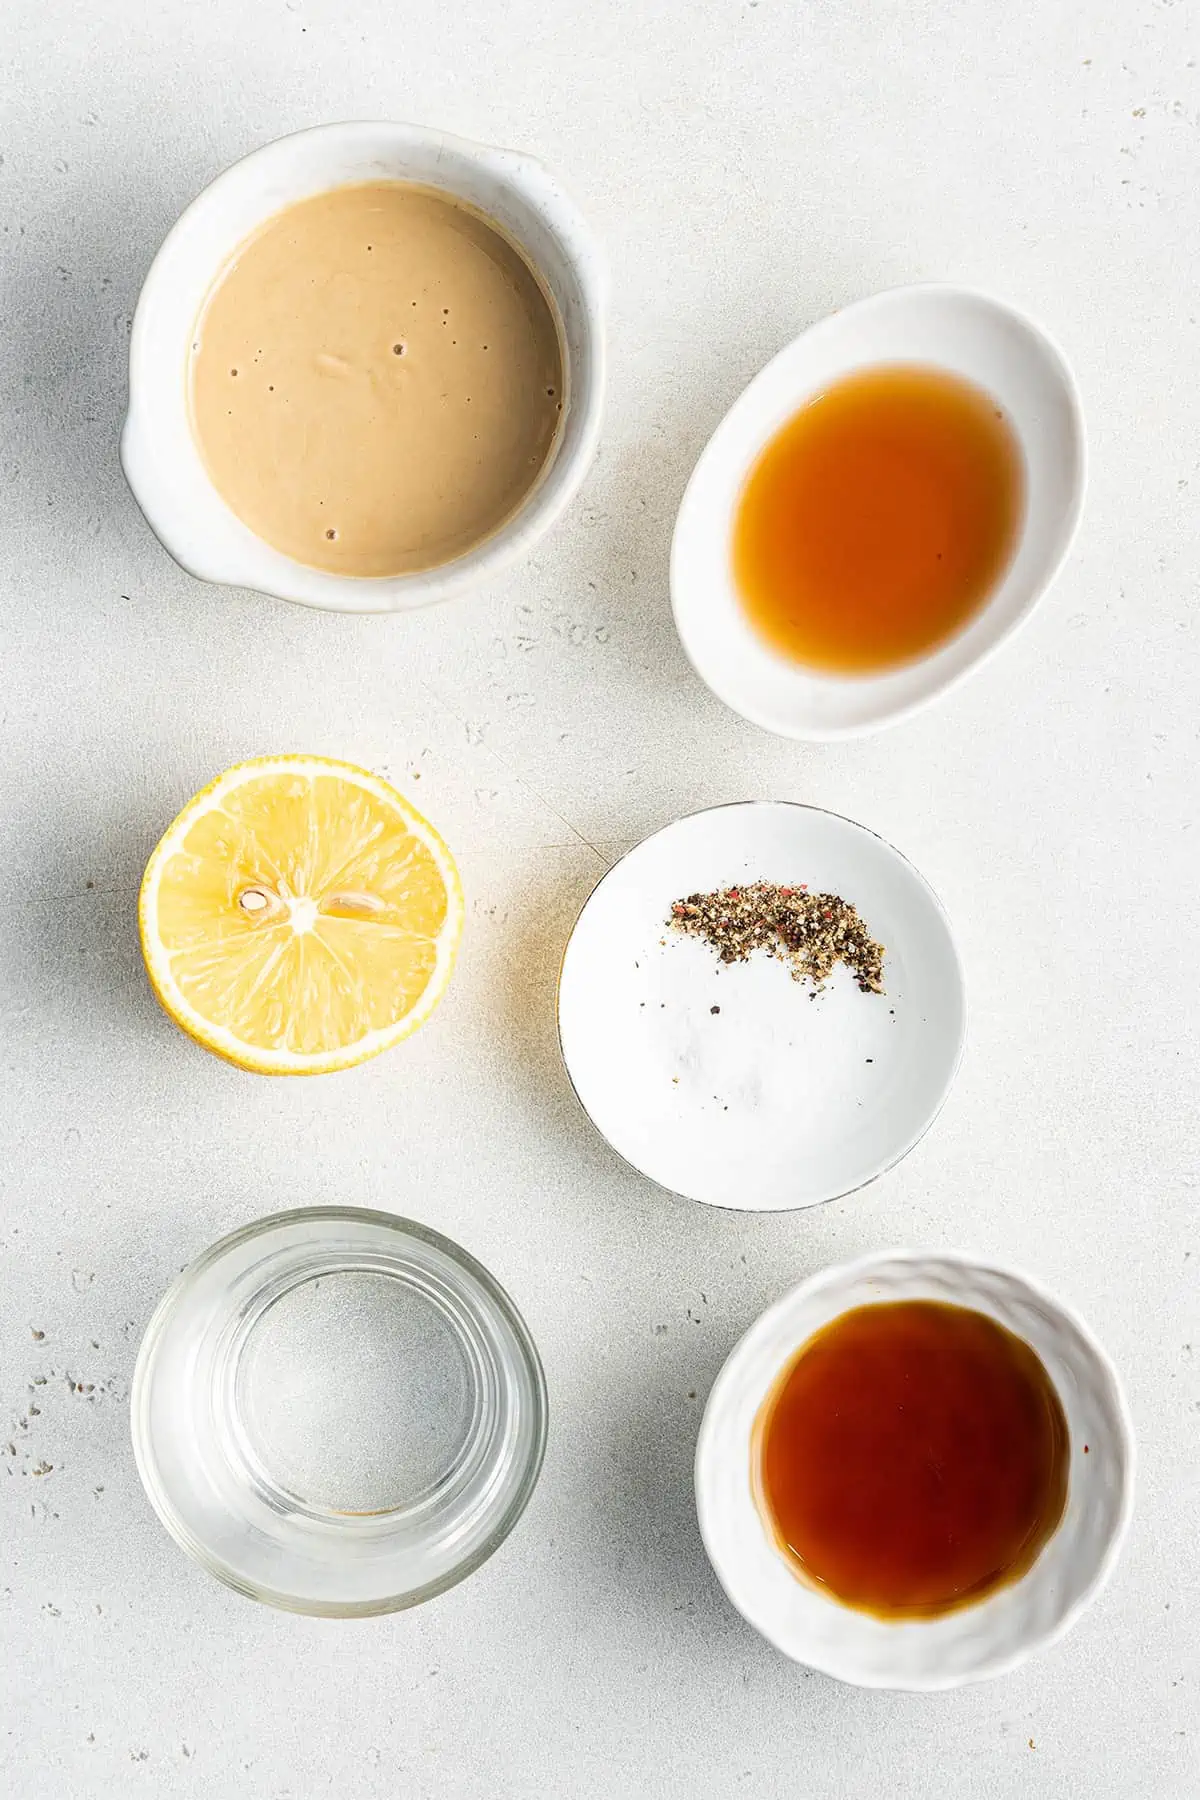 Overhead view of the ingredients needed for maple tahini dressing: half a lemon, and bowls of tahini, apple cider vinegar, maple syrup, water, and salt and pepper